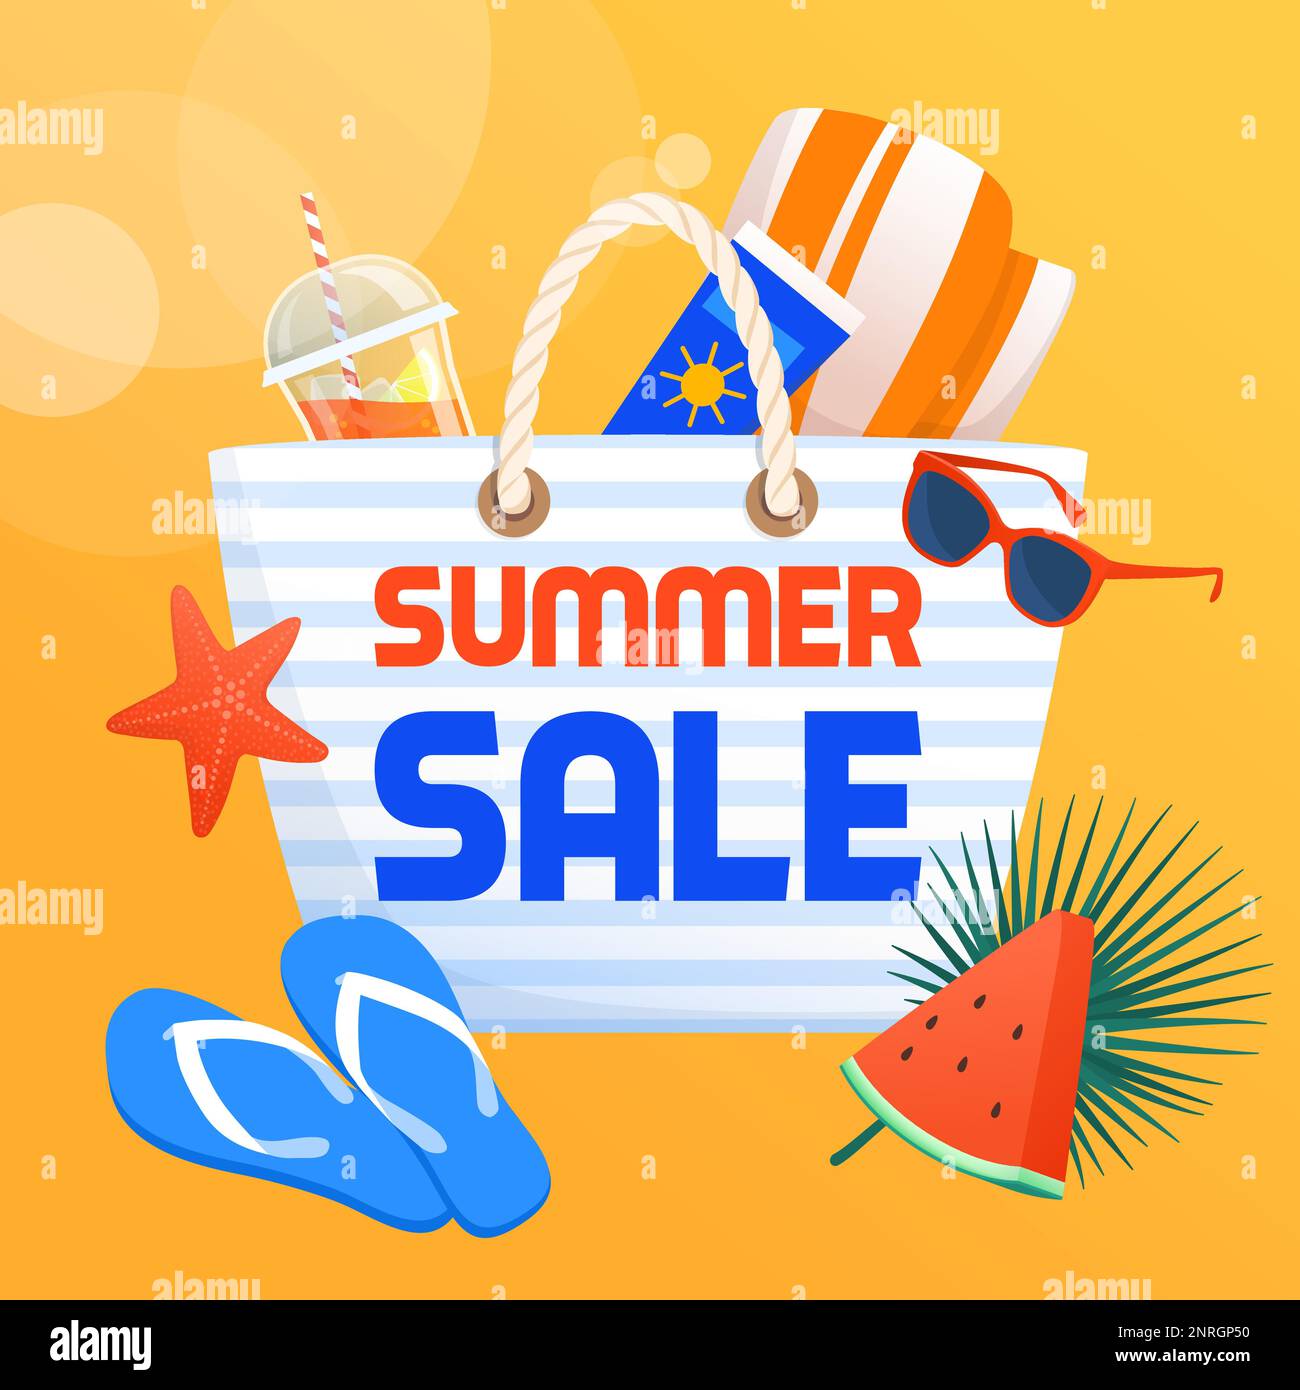 Summer sale advertisement with beach bag and accessories Stock Vector